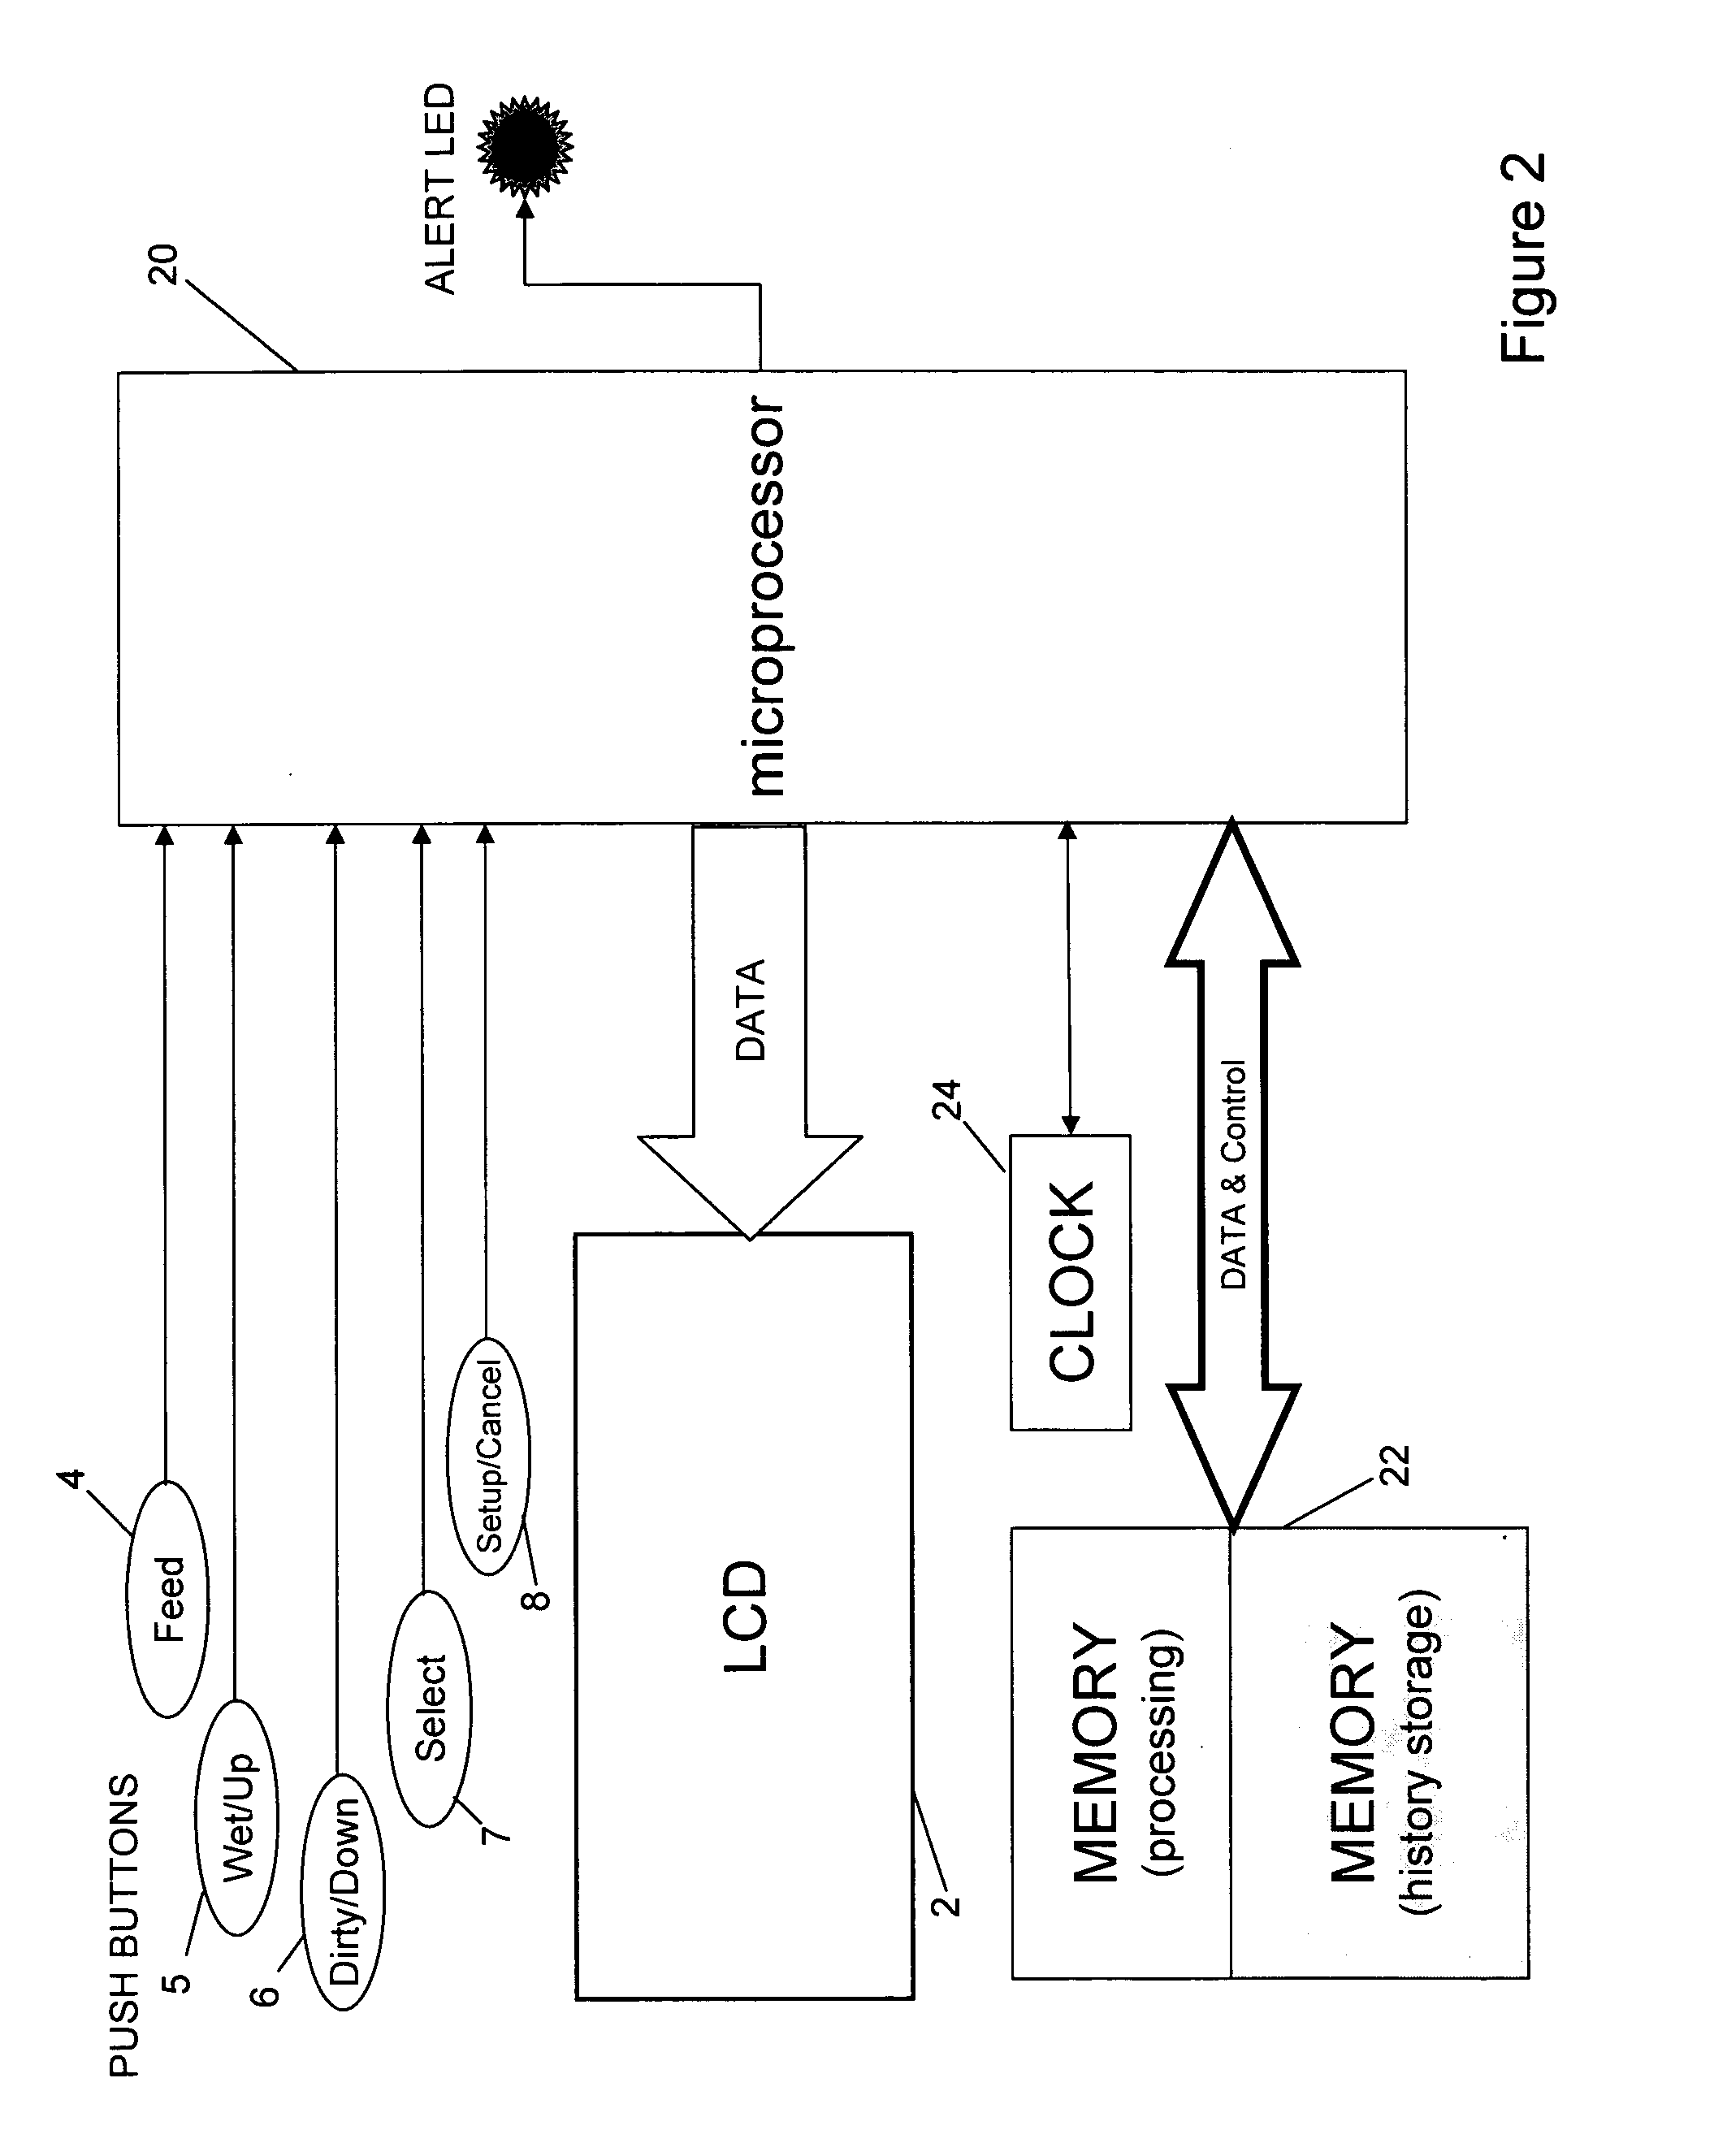 Breast feeding monitoring device and method